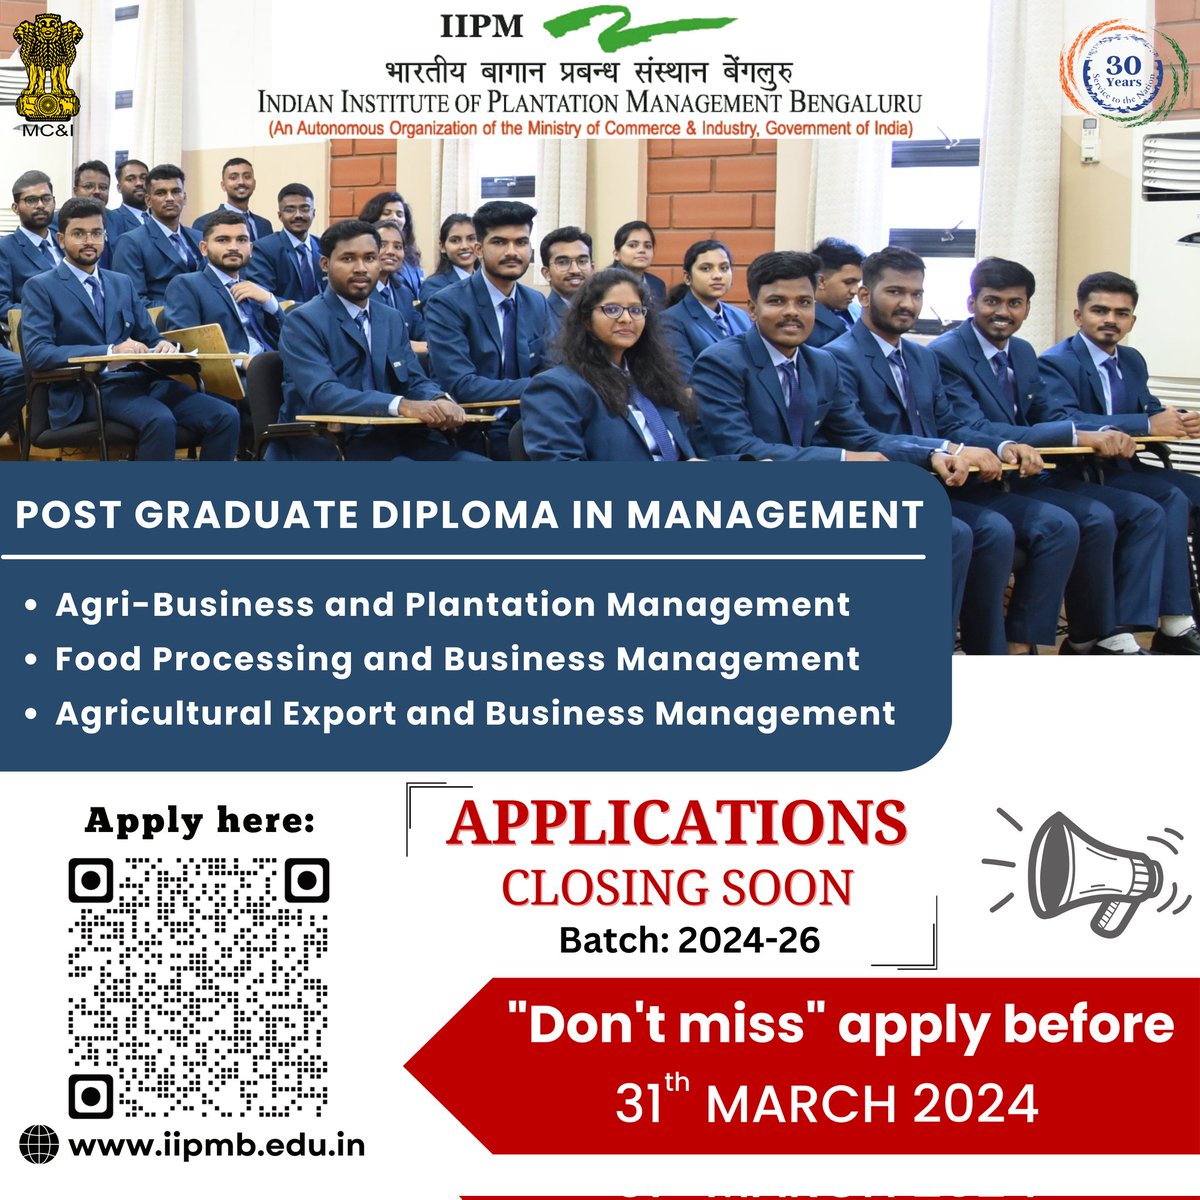 2024 PGDM Applications are closing soon!

Join our intensive #PGDM programs to elevate your skills and cultivate your success in the future.

Enroll today to unlock the opportunities ahead!

#IIPMB1993 #iipmb #agribusiness #plantation #foodprocessing #agriexport #mbaadmission